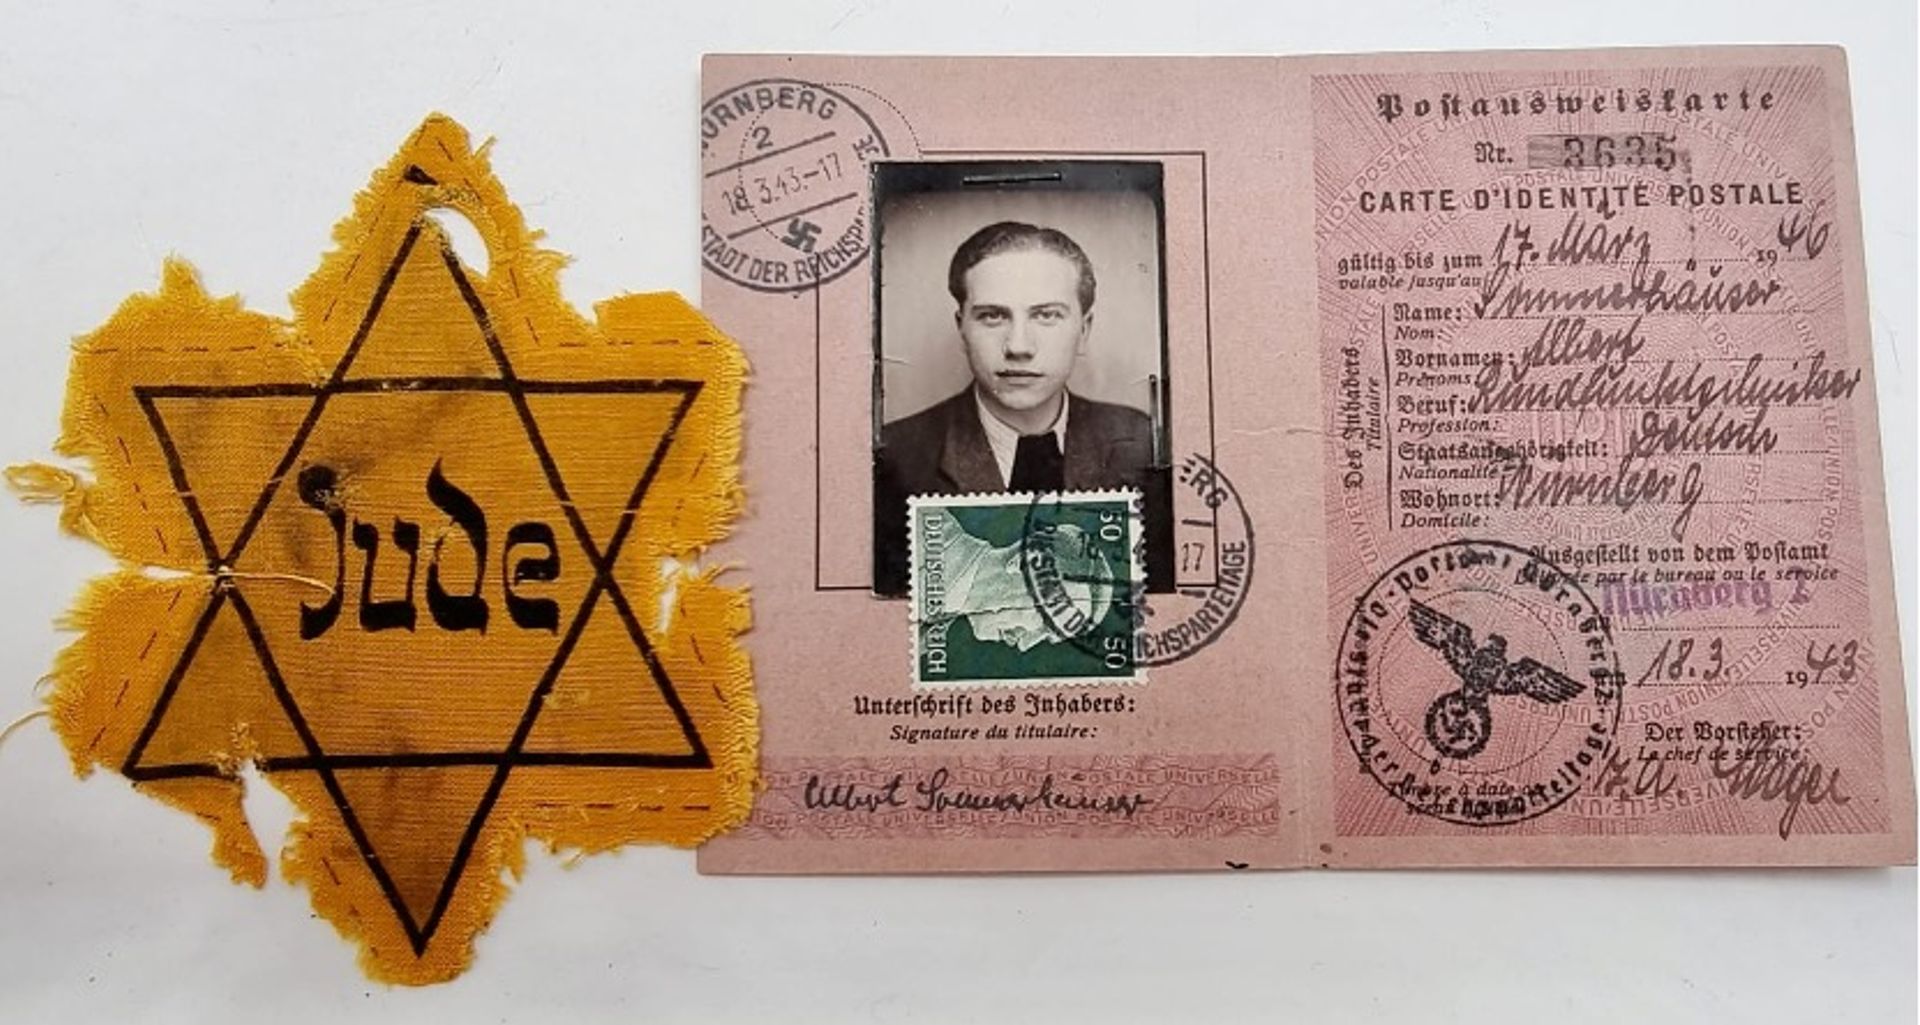 A yellow badge, which was used to identify Jewish people during the Nazi period (left), and a Holocaust survivor's ID card (right). Courtesy of Pentagon Auctions